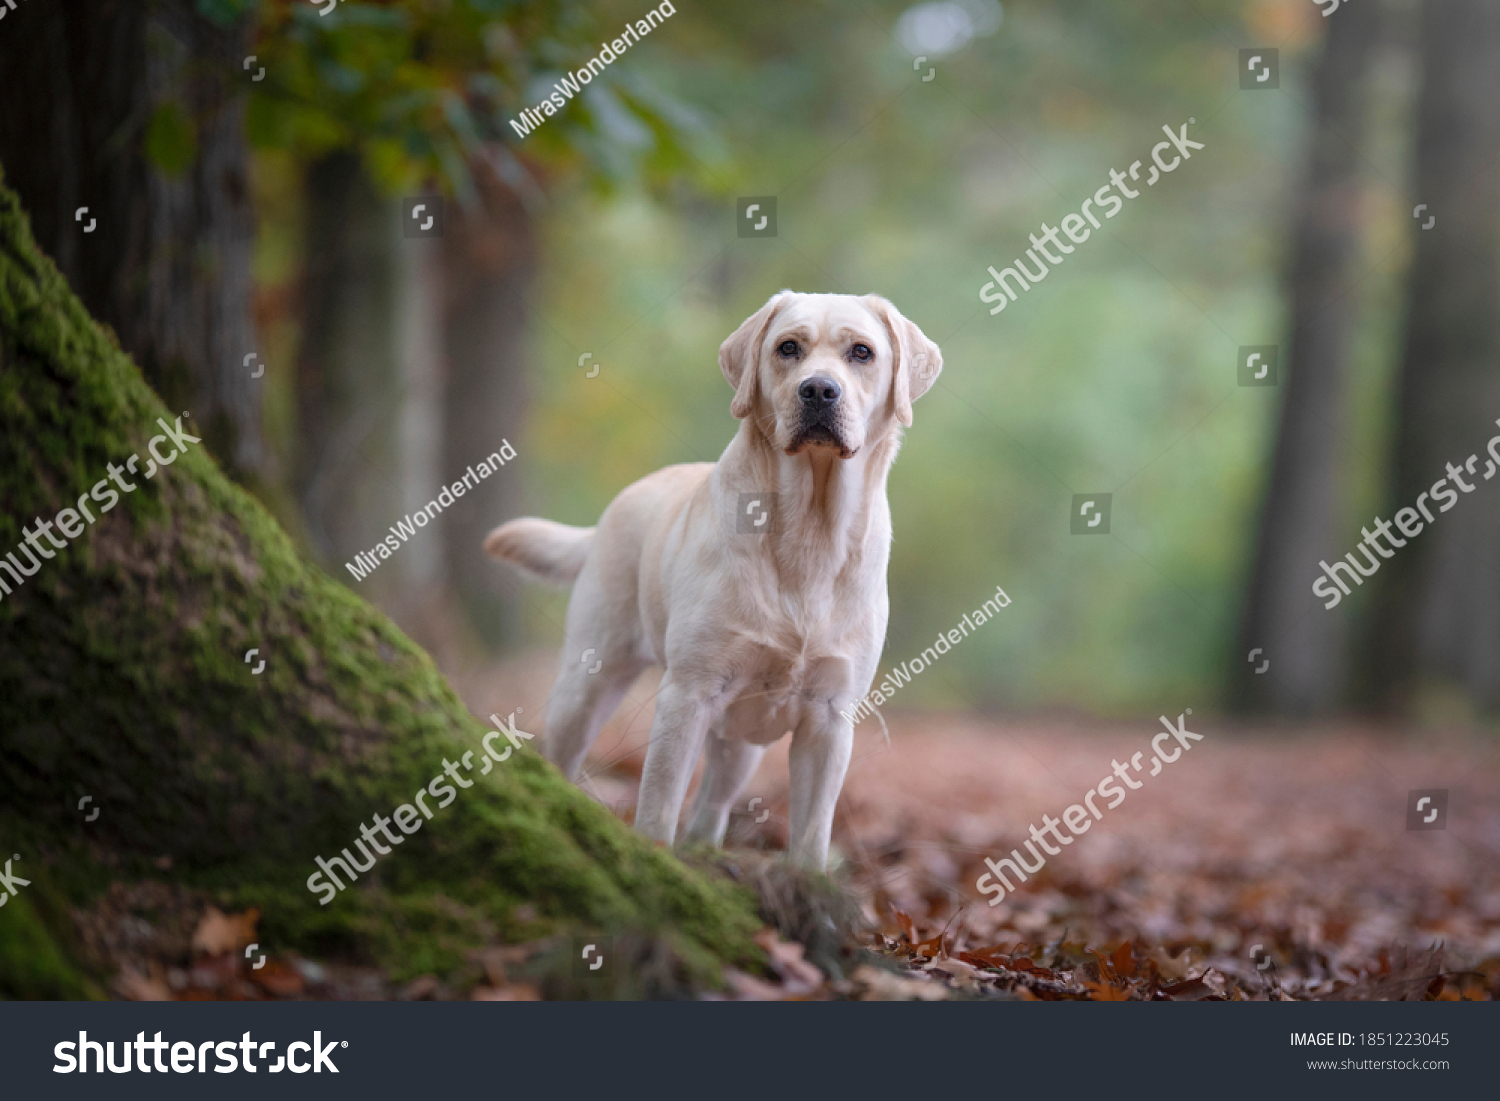 Pretty yellow labrador retriever standing in a forest lane #1851223045